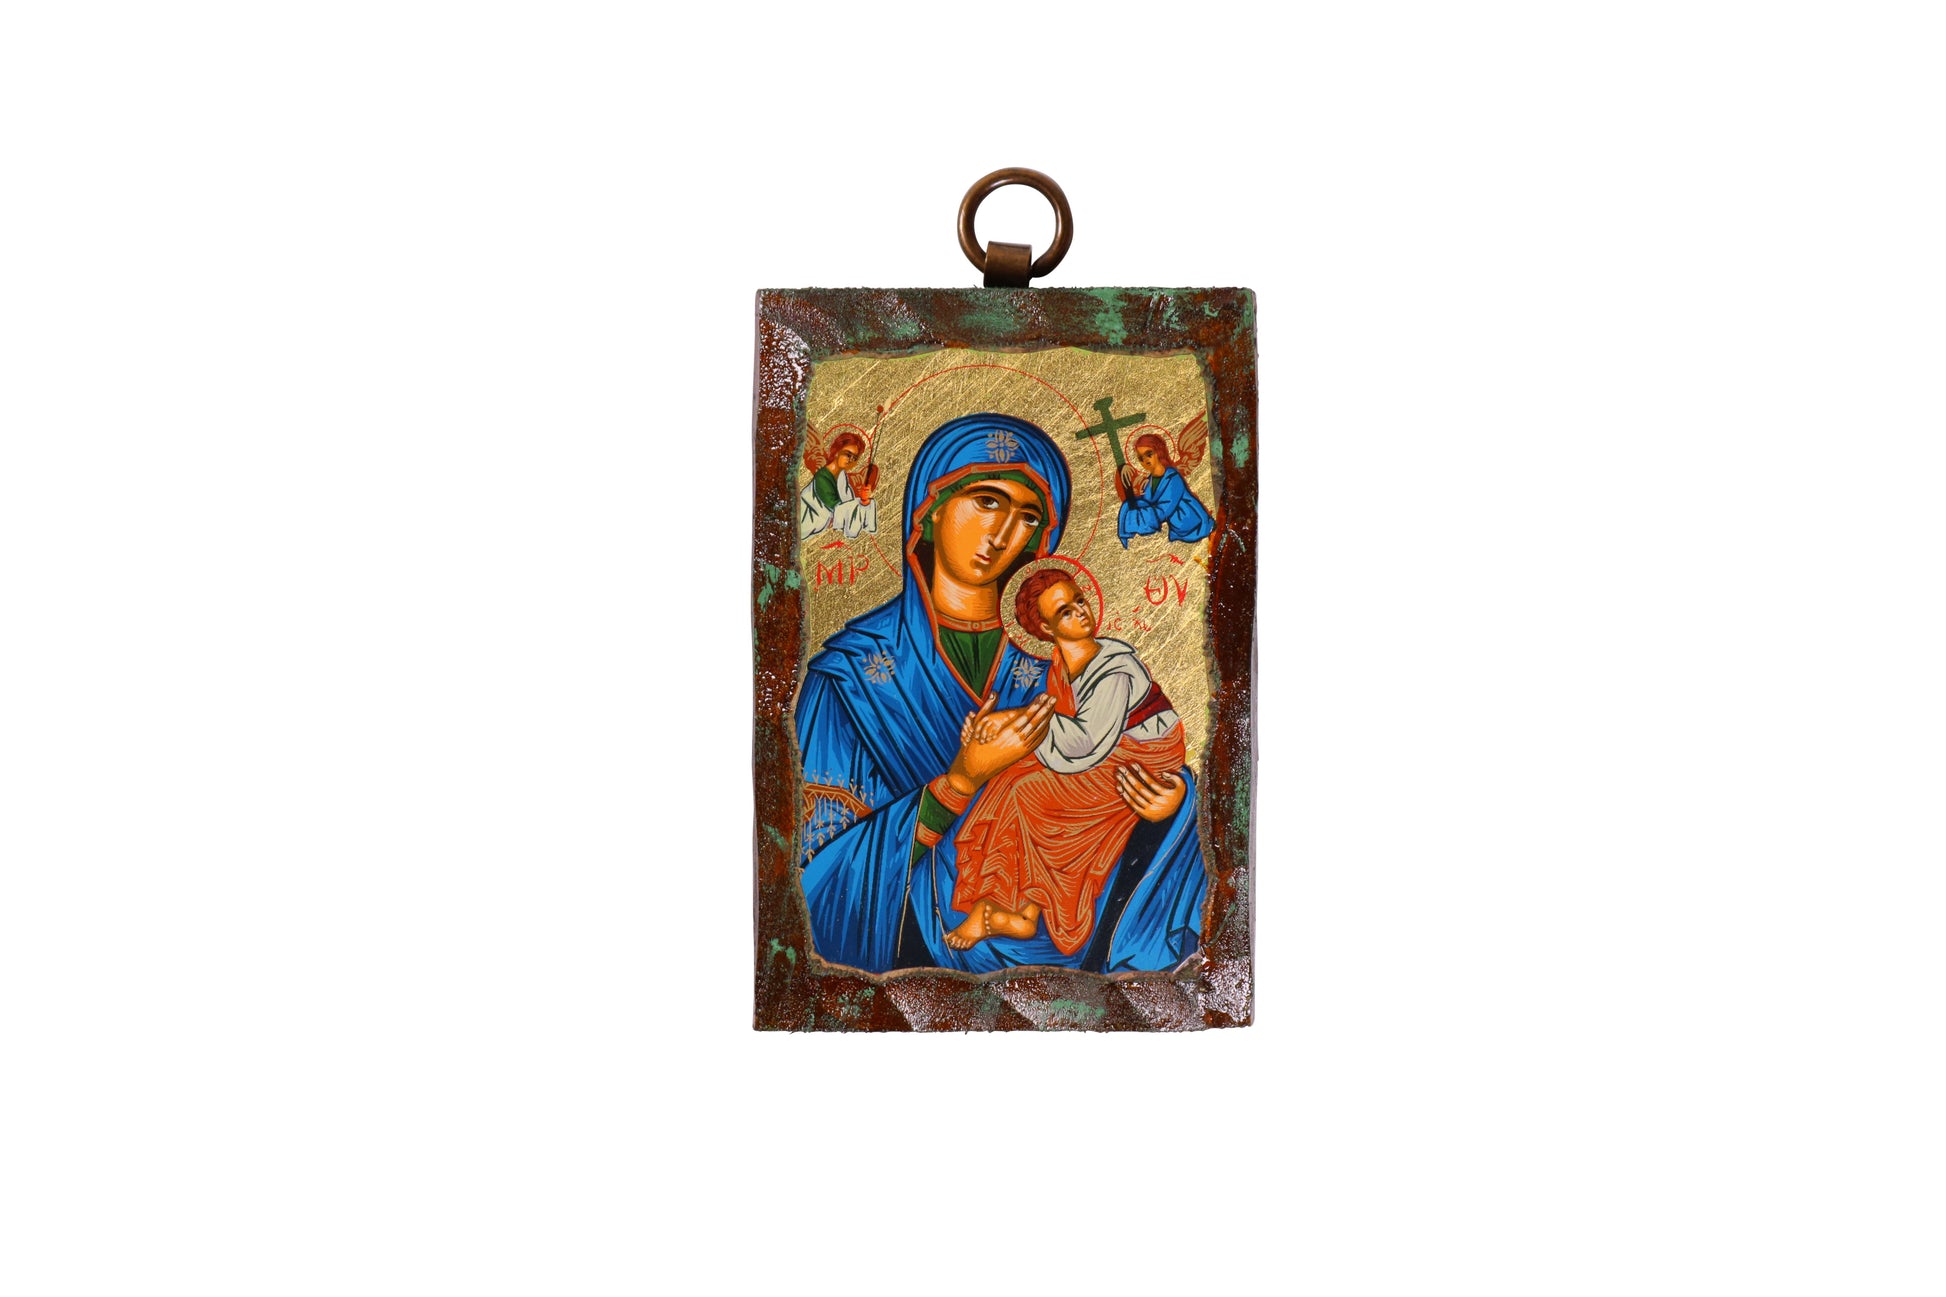 An icon of the Virgin Mary in a blue robe holding the child Jesus, with both figures haloed against a gold leaf background. Above them are two angels, and the icon is bordered by a dark, textured frame with a metal loop at the top for hanging.